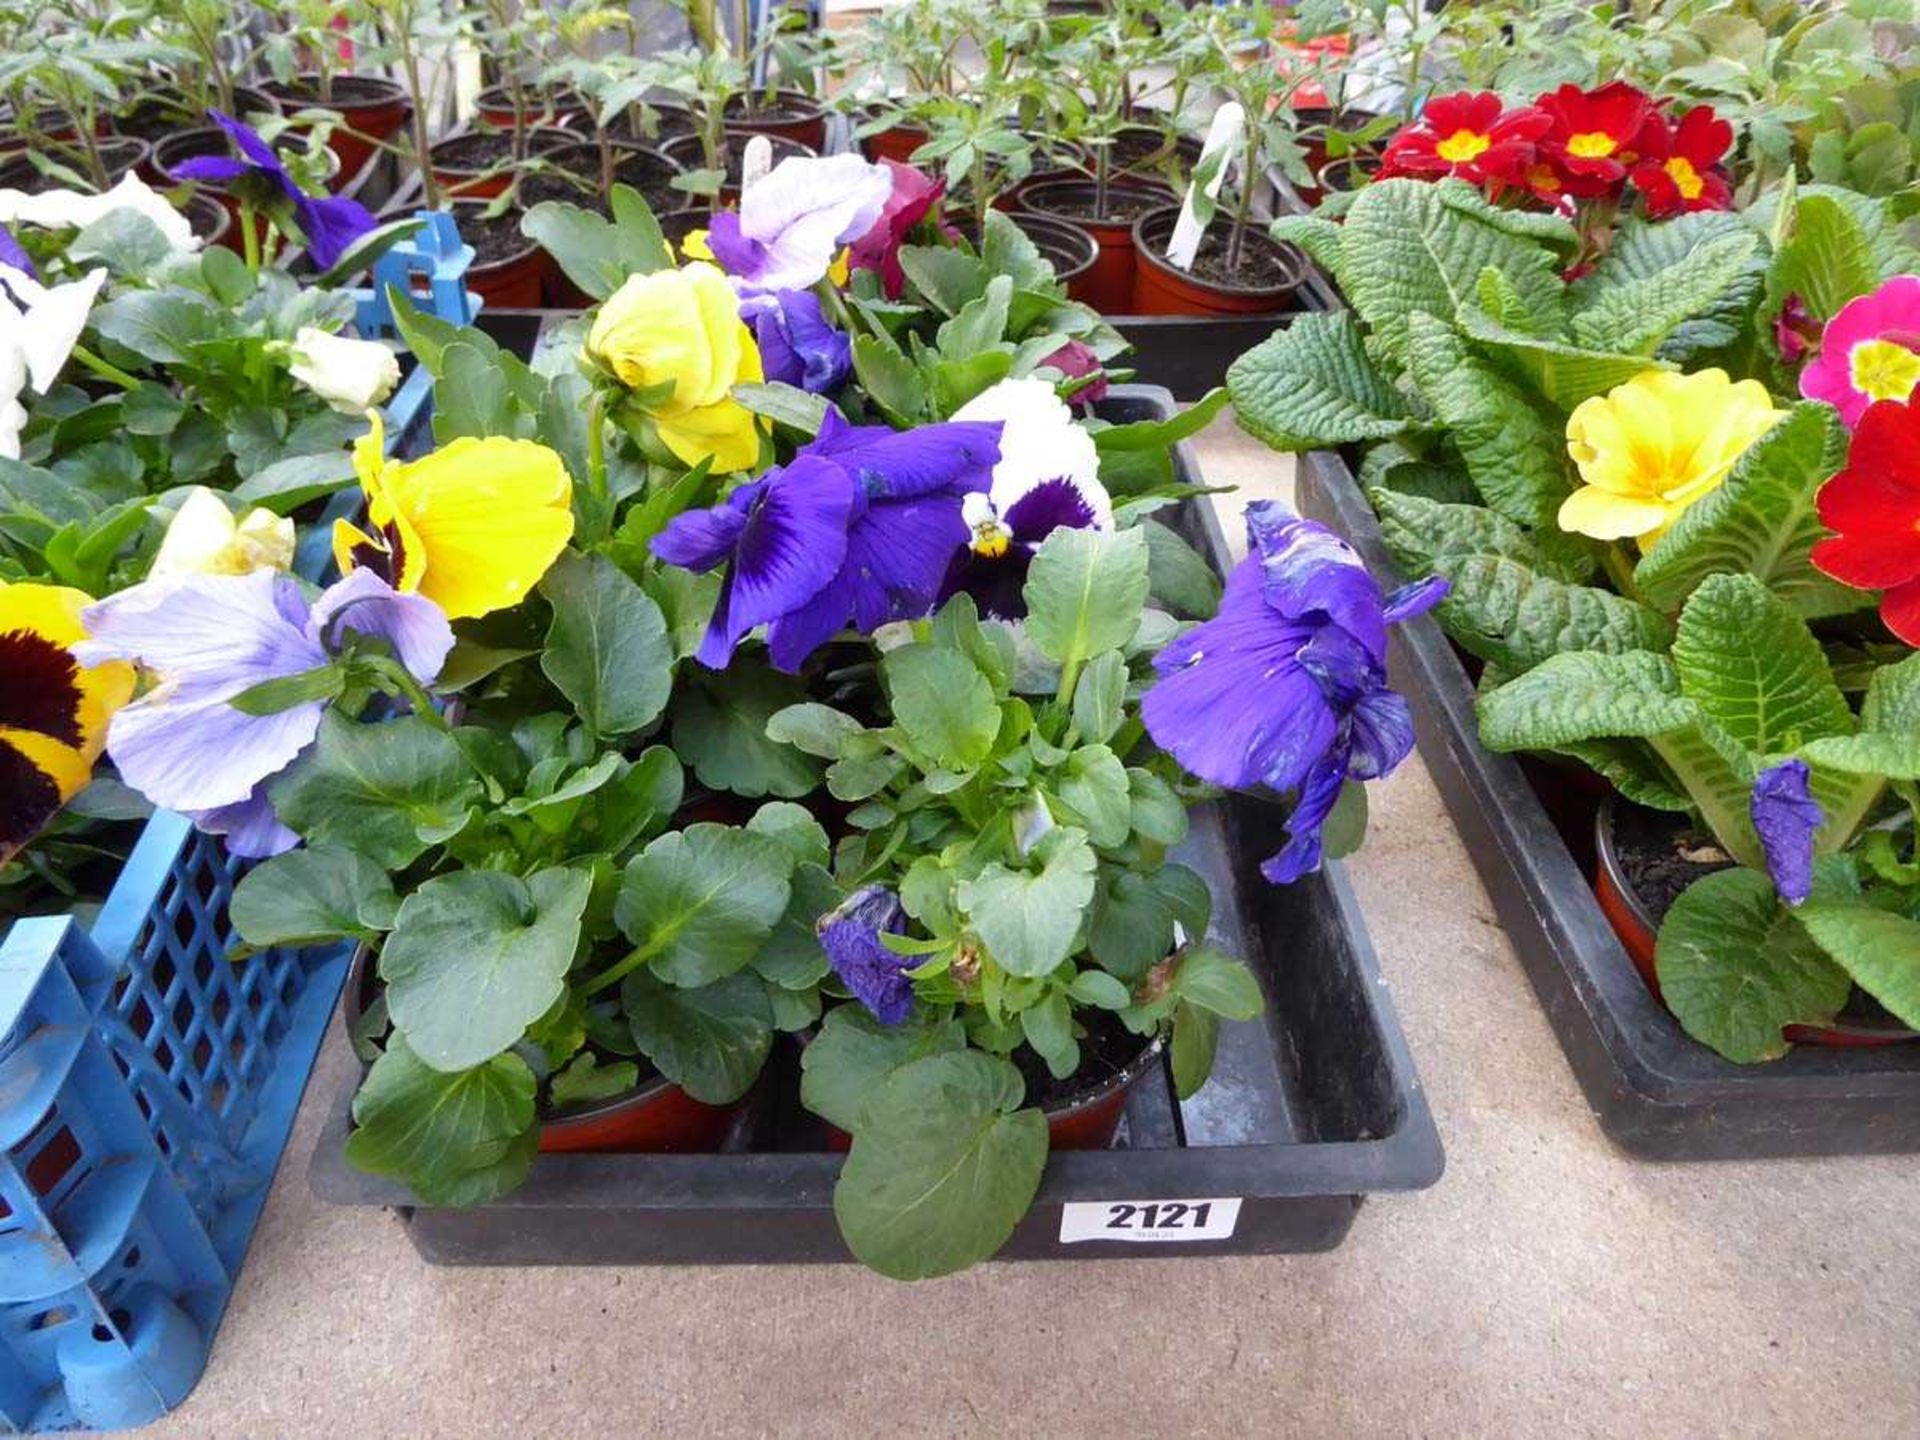 Tray containing 8 pots of pansies